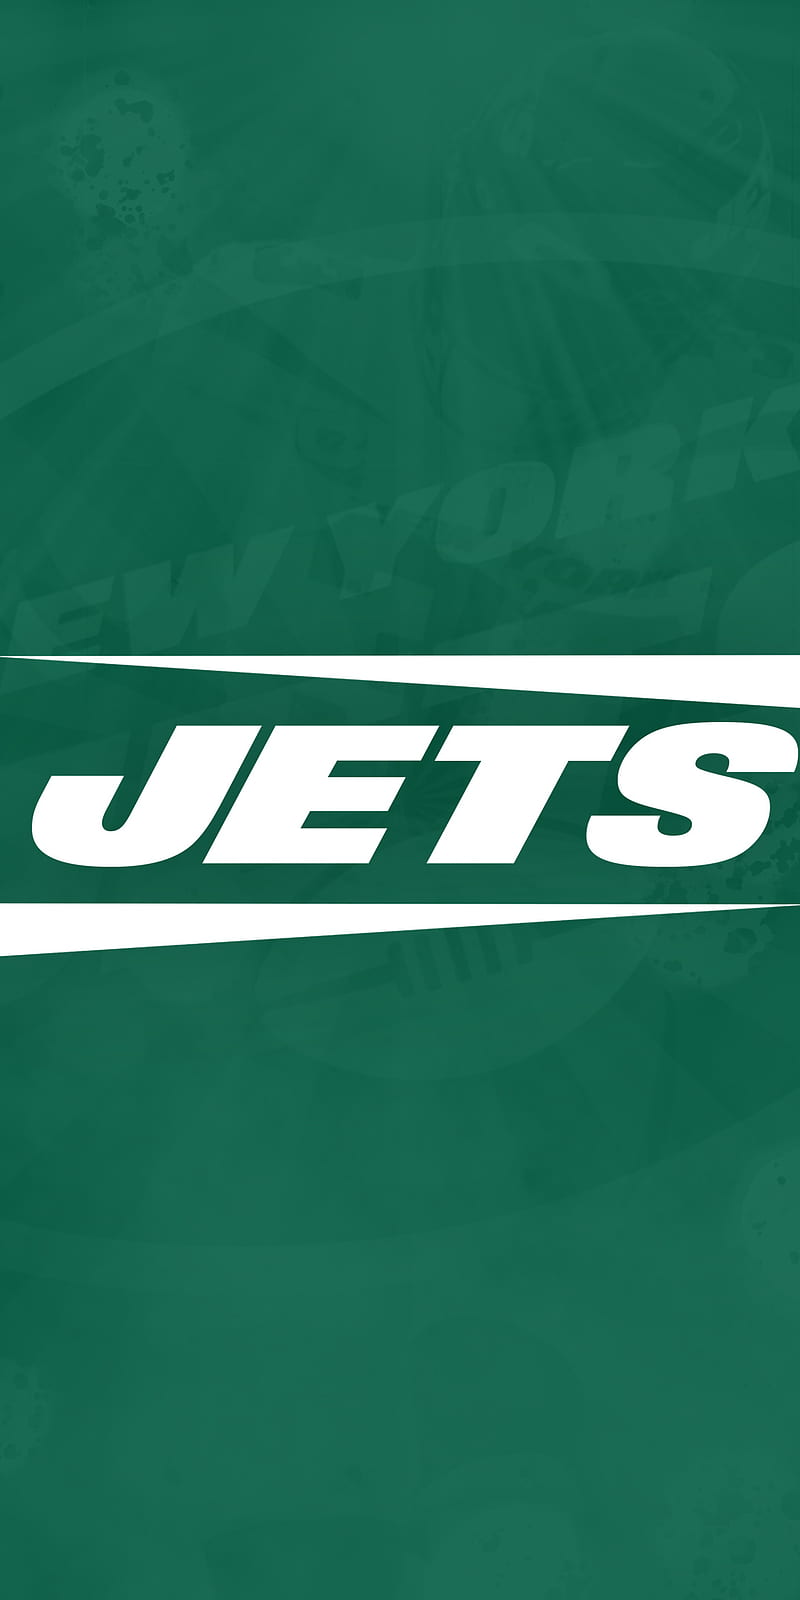 70+ New York Jets HD Wallpapers and Backgrounds